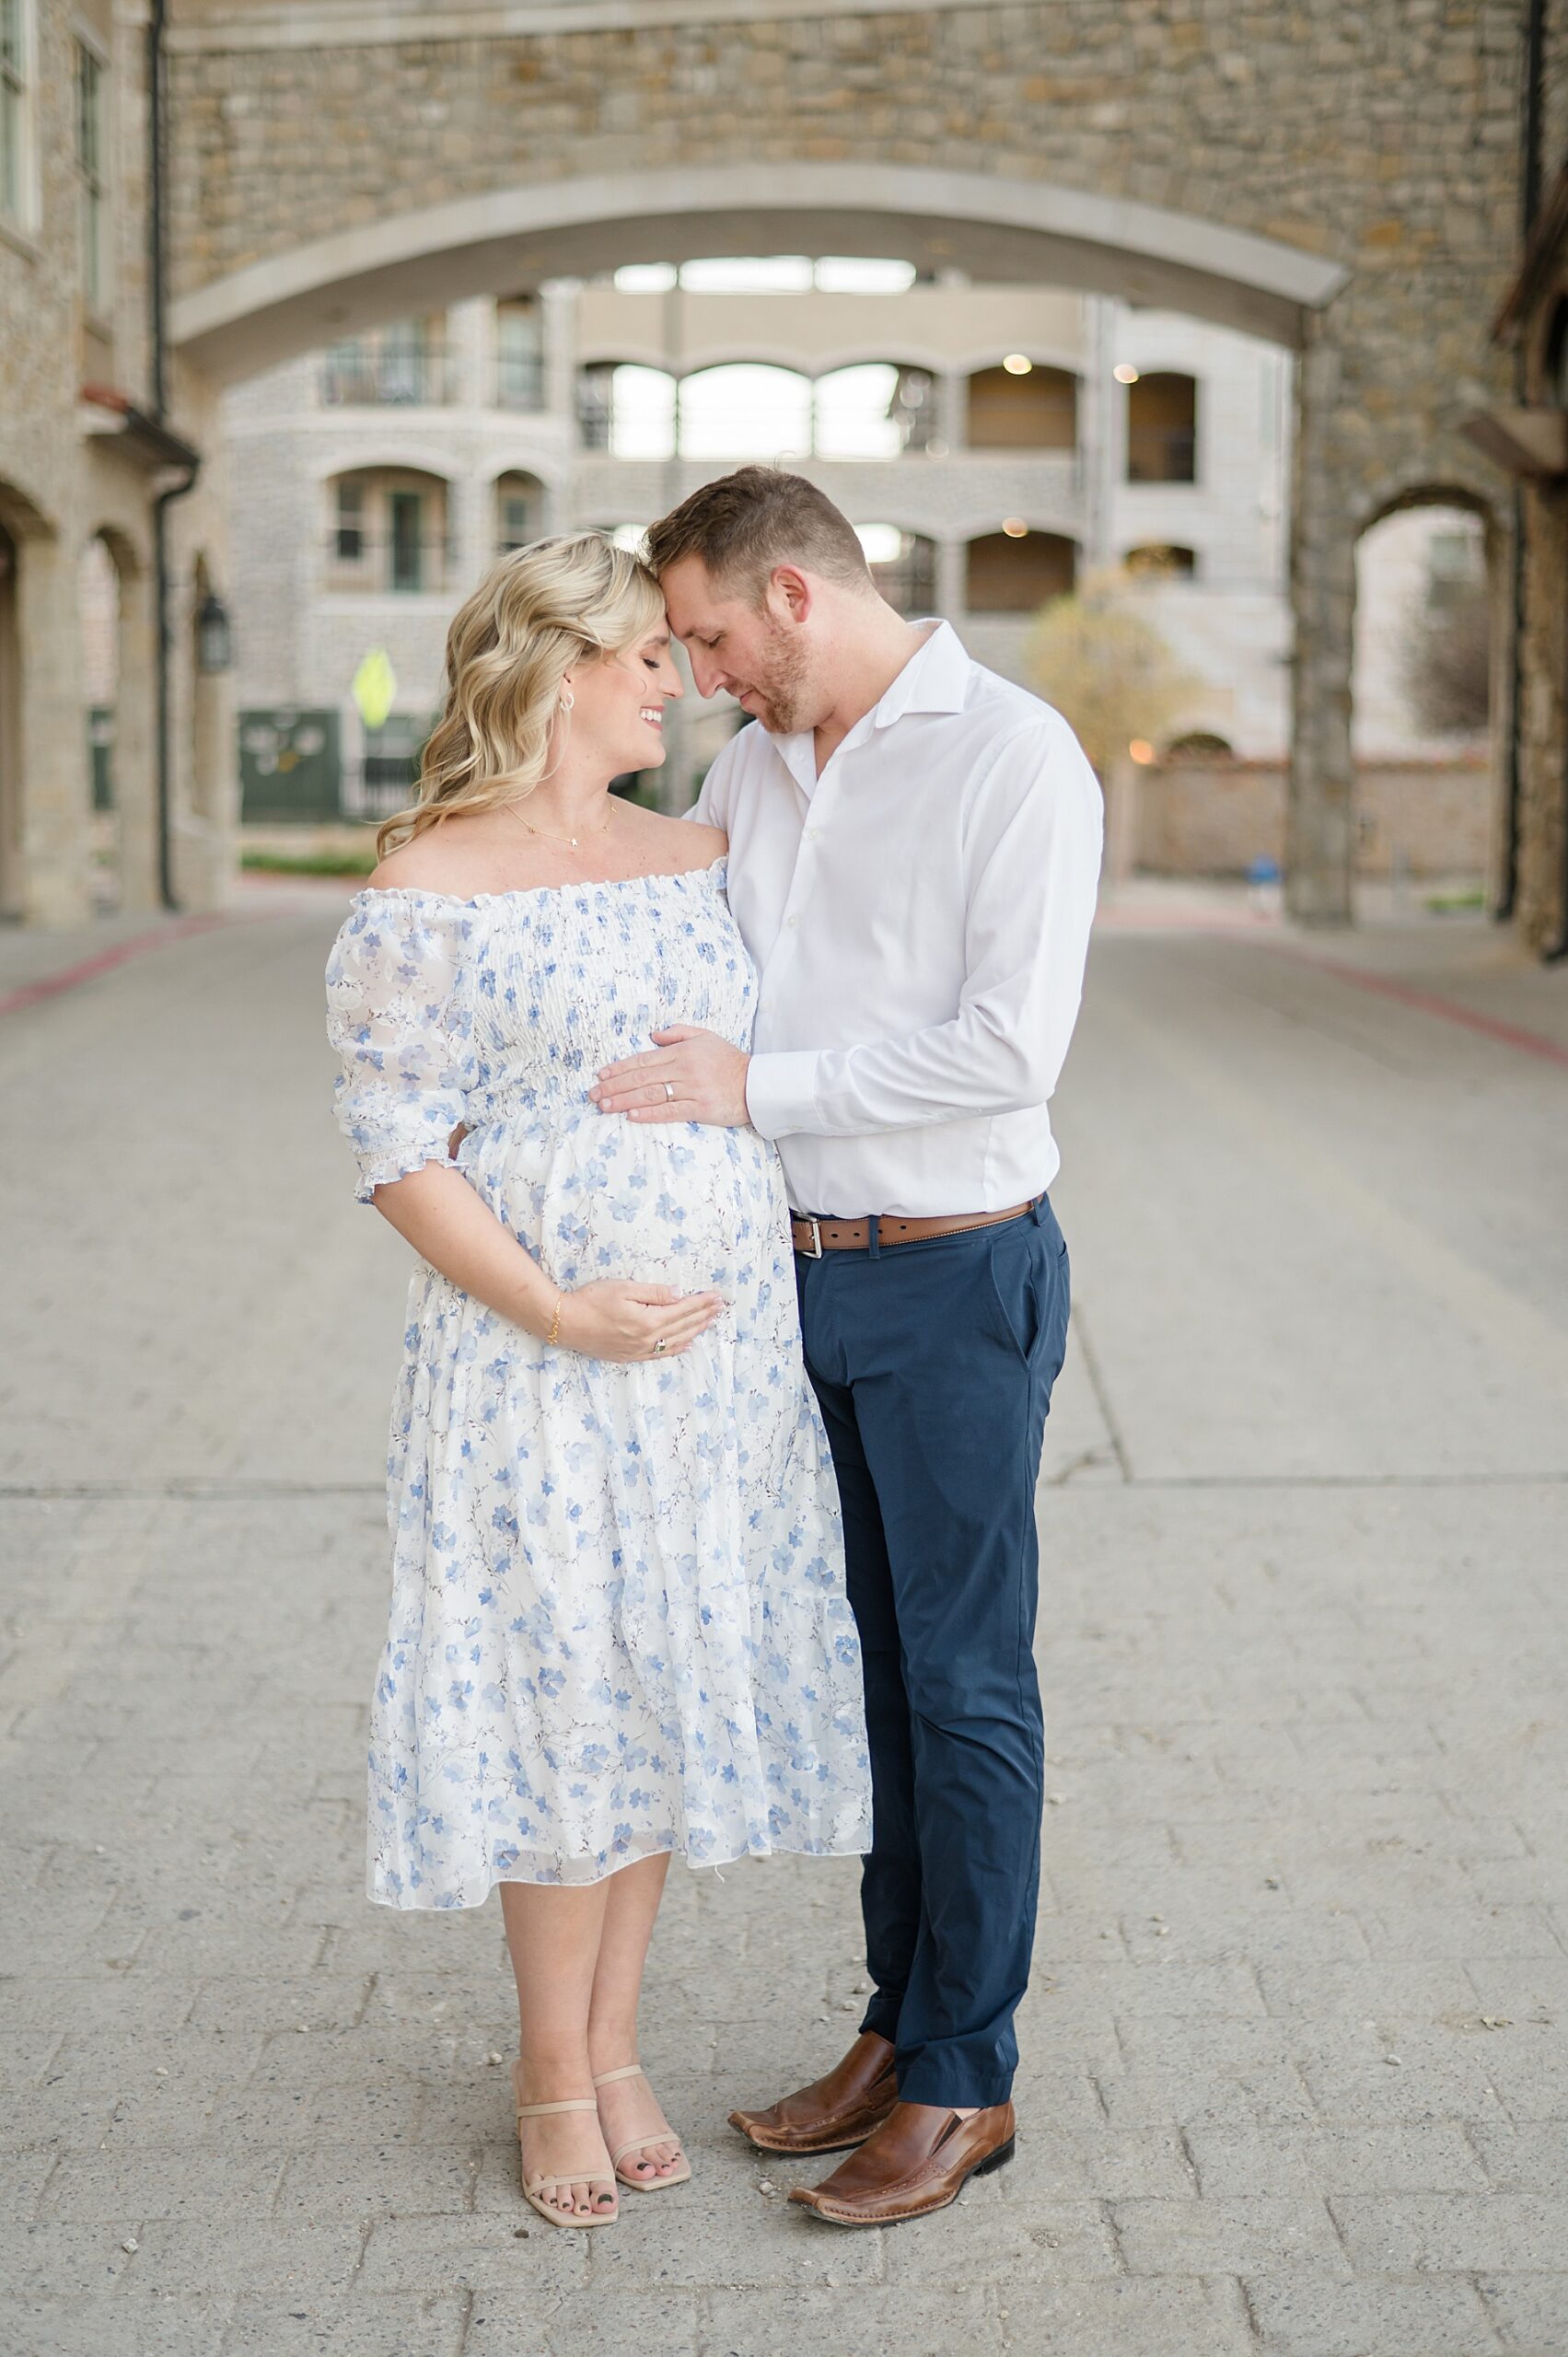 light and airy maternity portraits photographed by Lindsey Dutton Photography, a Dallas Family photographer
